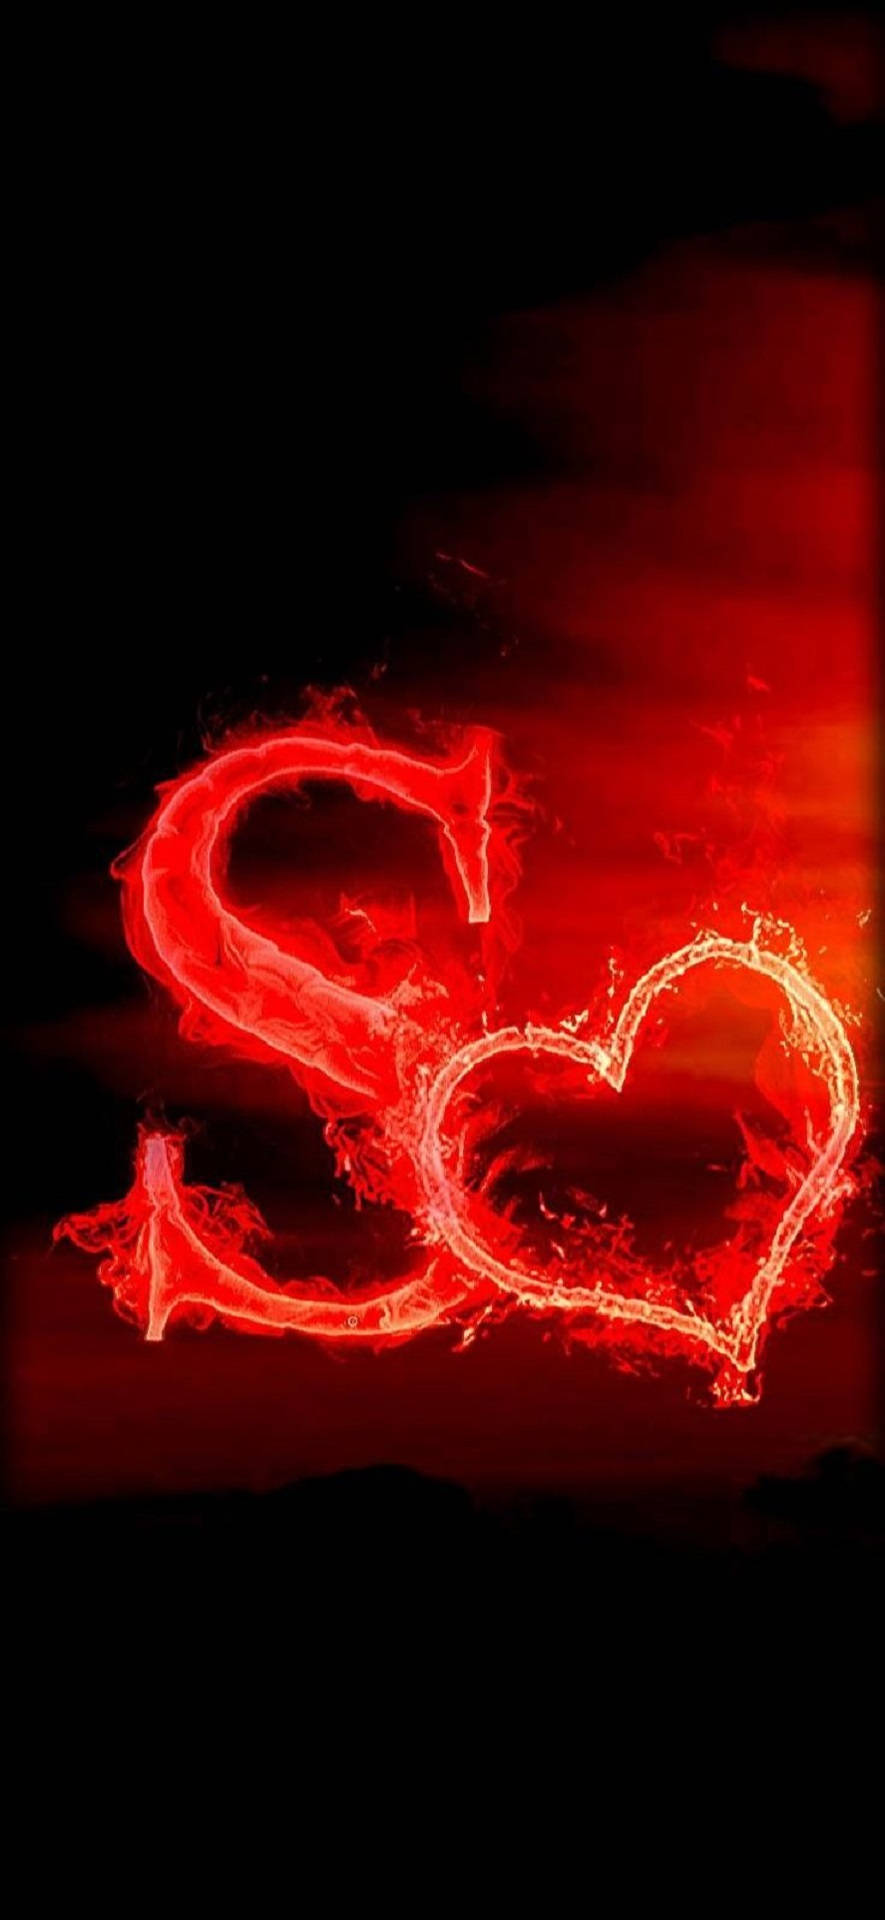 Fiery Letter S And Heart